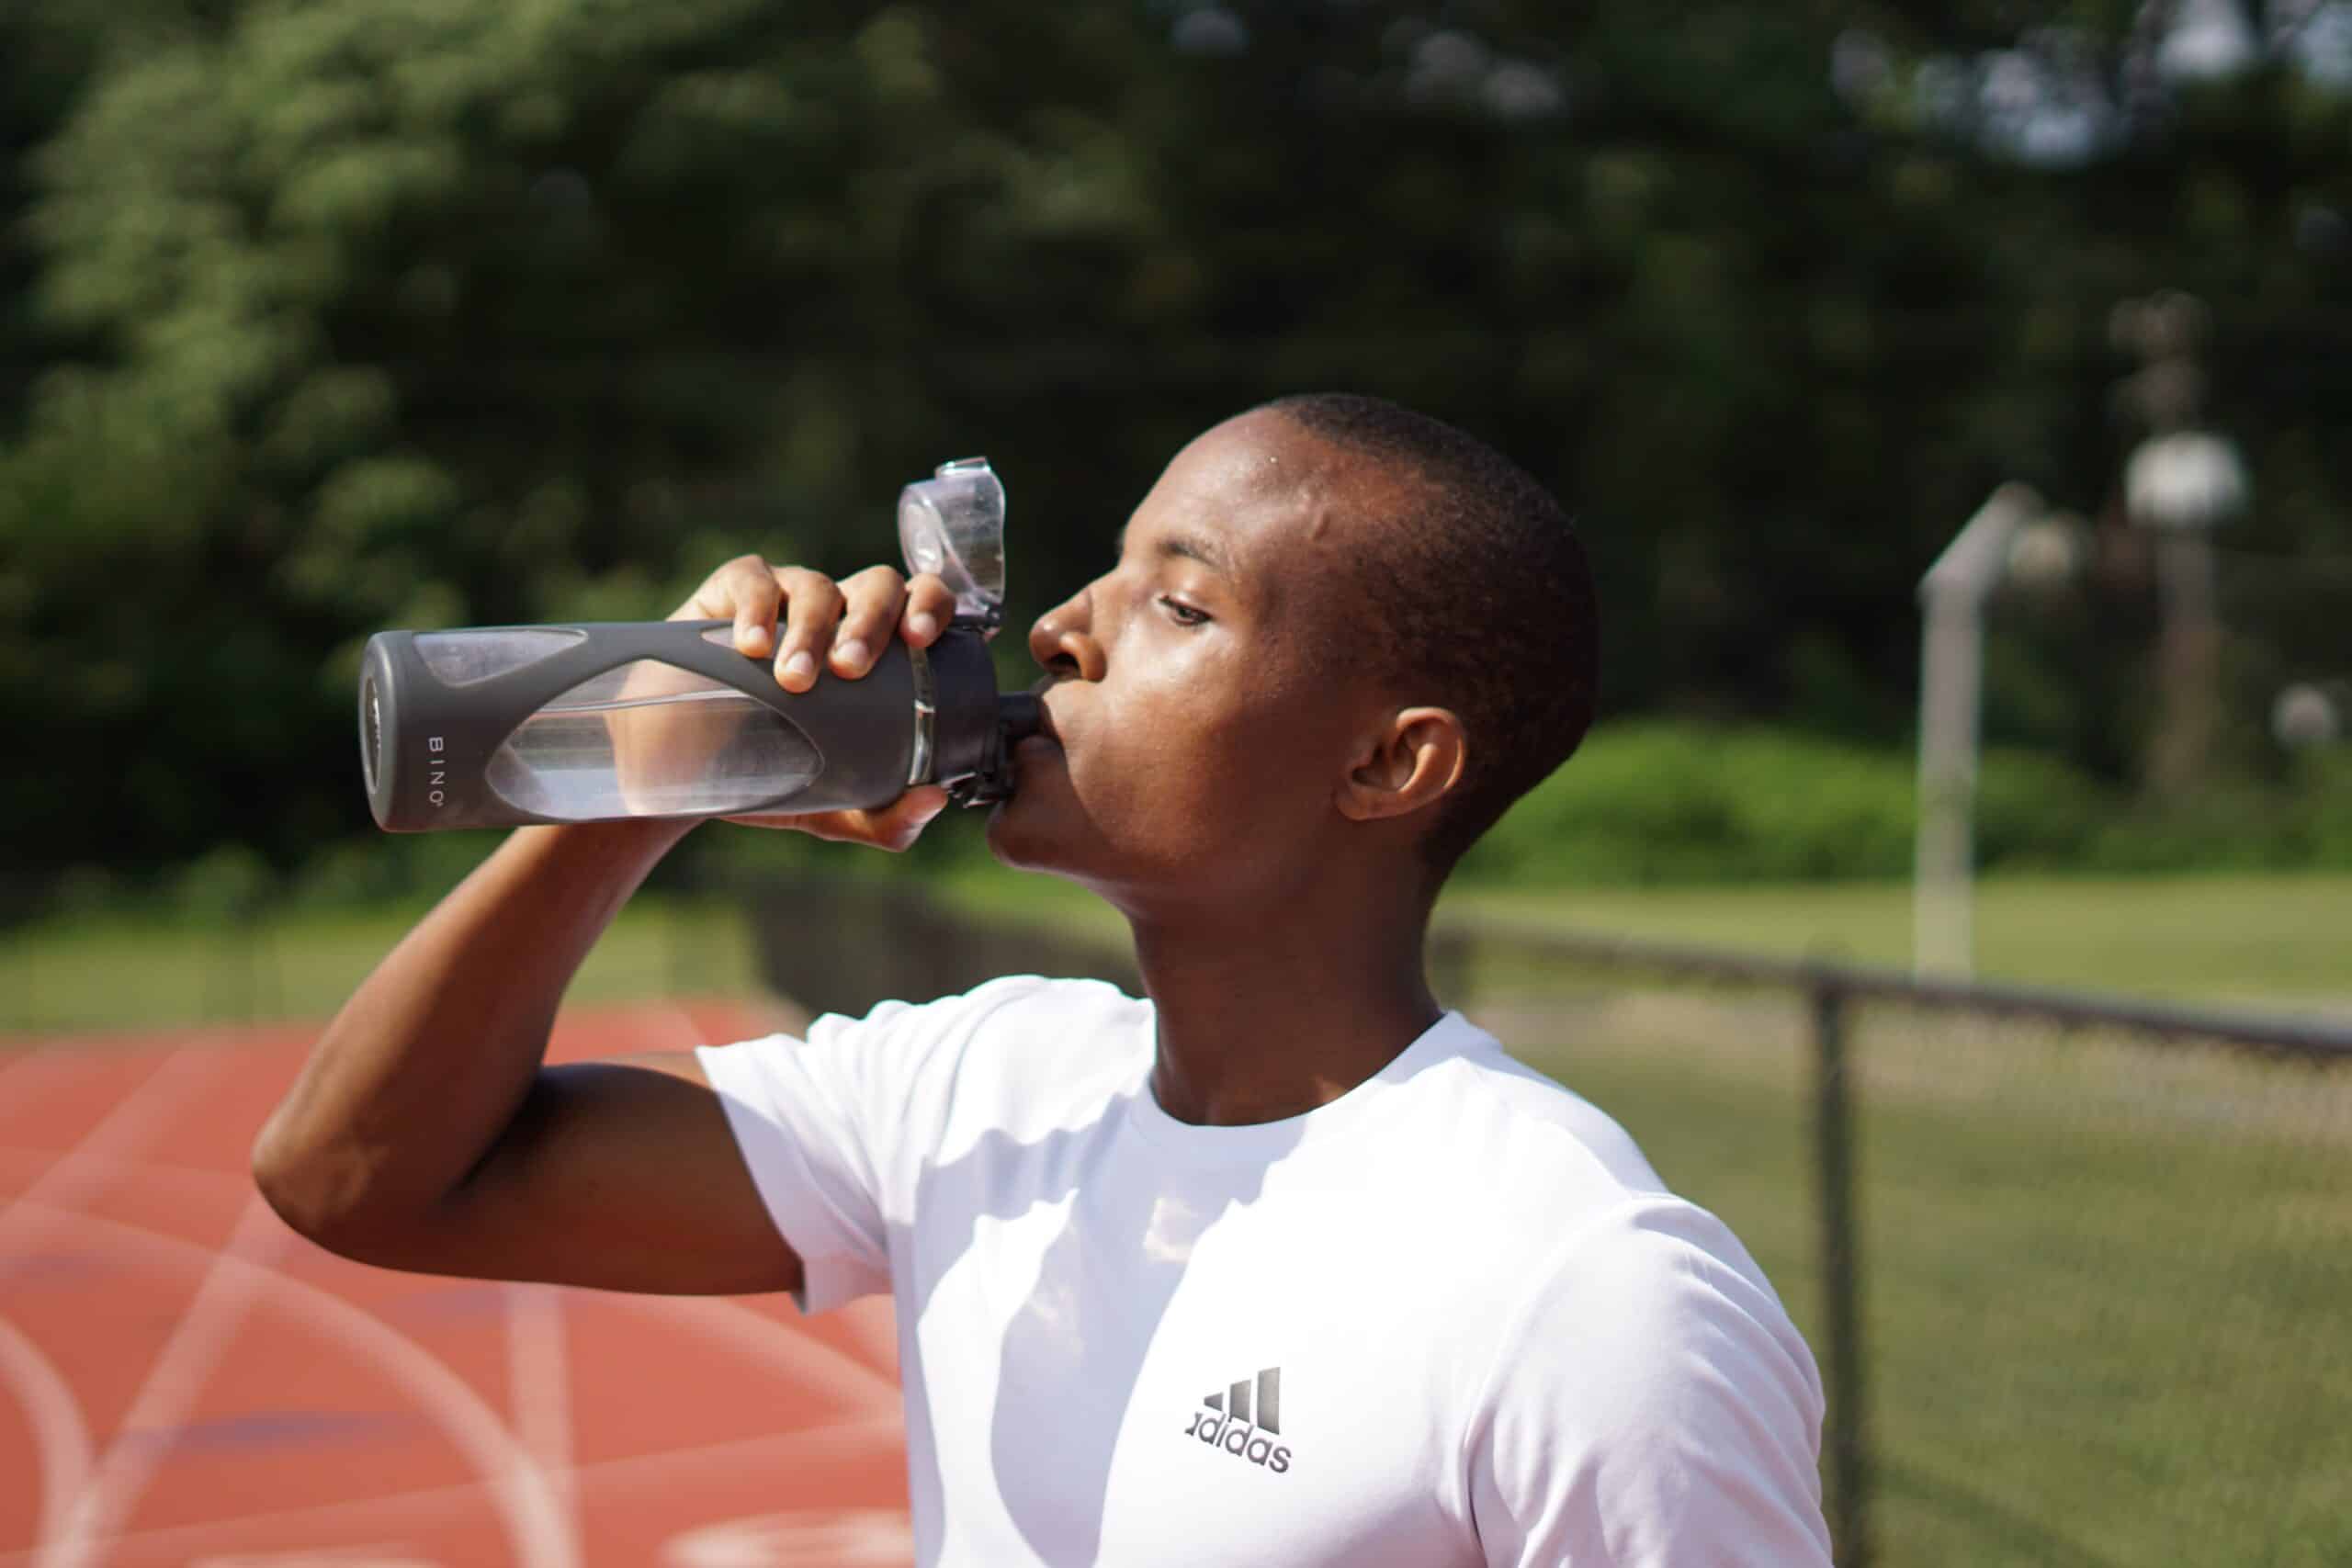 An athlete drinking water.